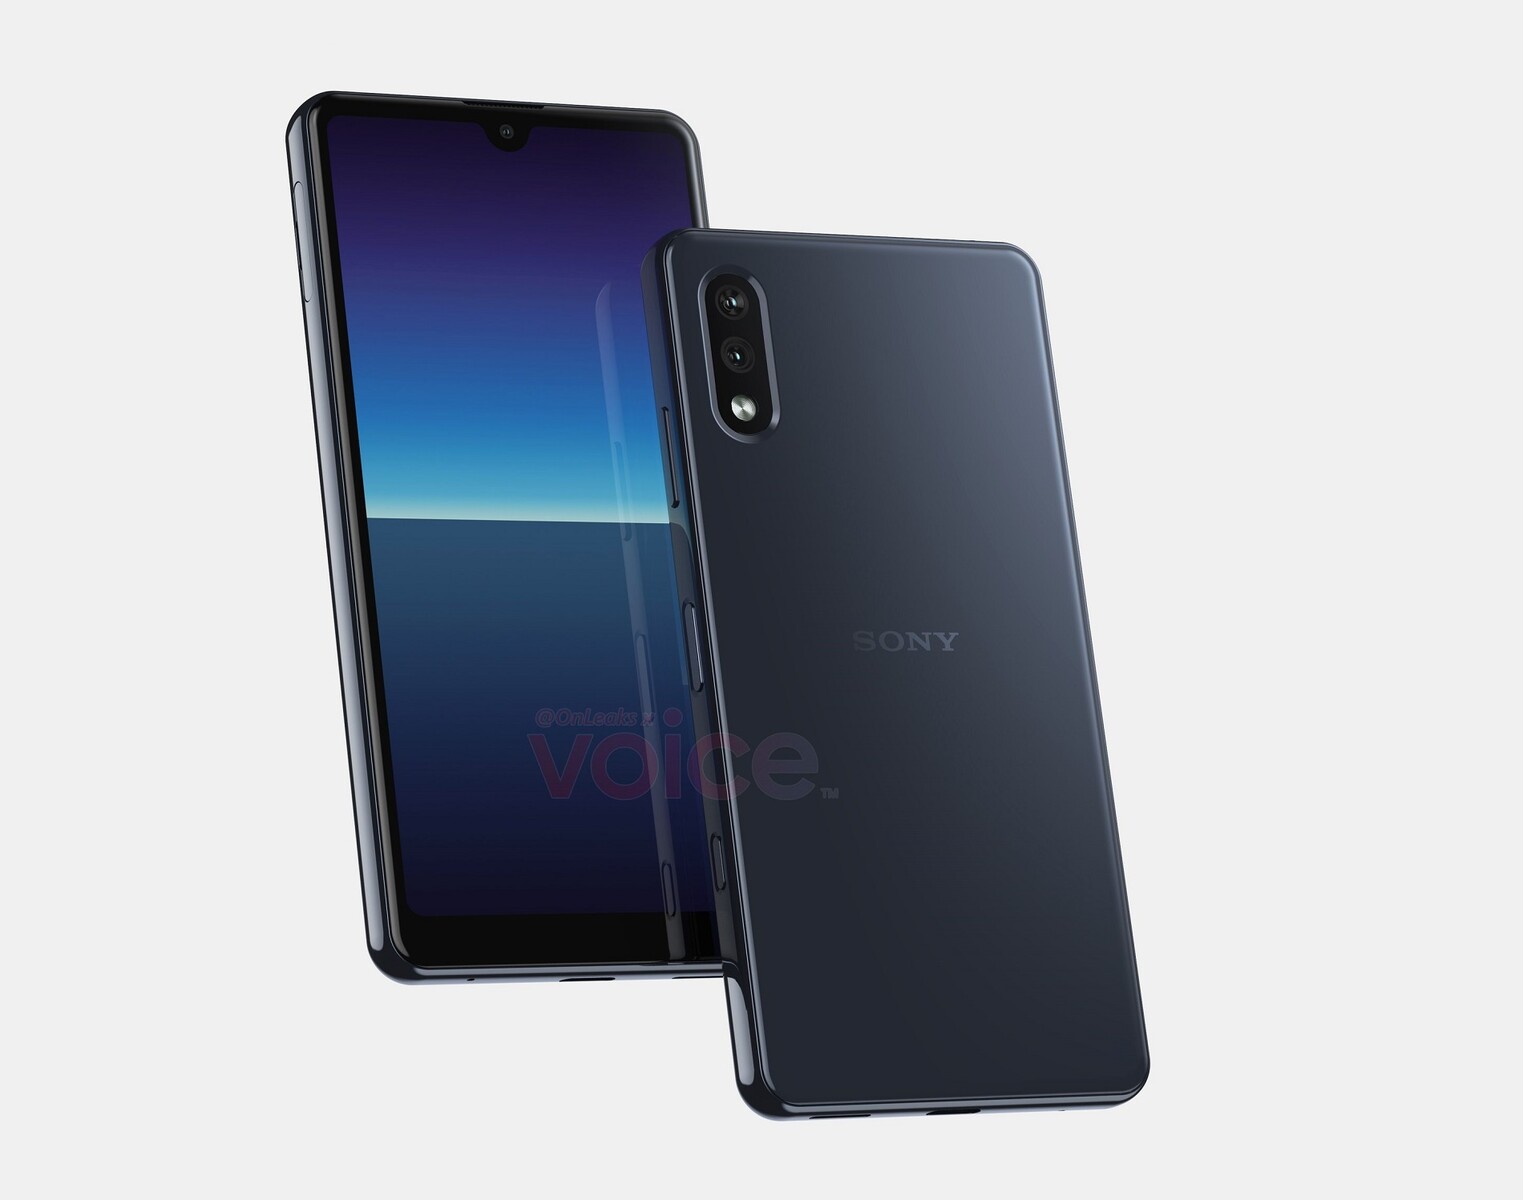 Sony’s next compact Xperia smartphone revealed a height of 140 mm and a 5.5 inch screen